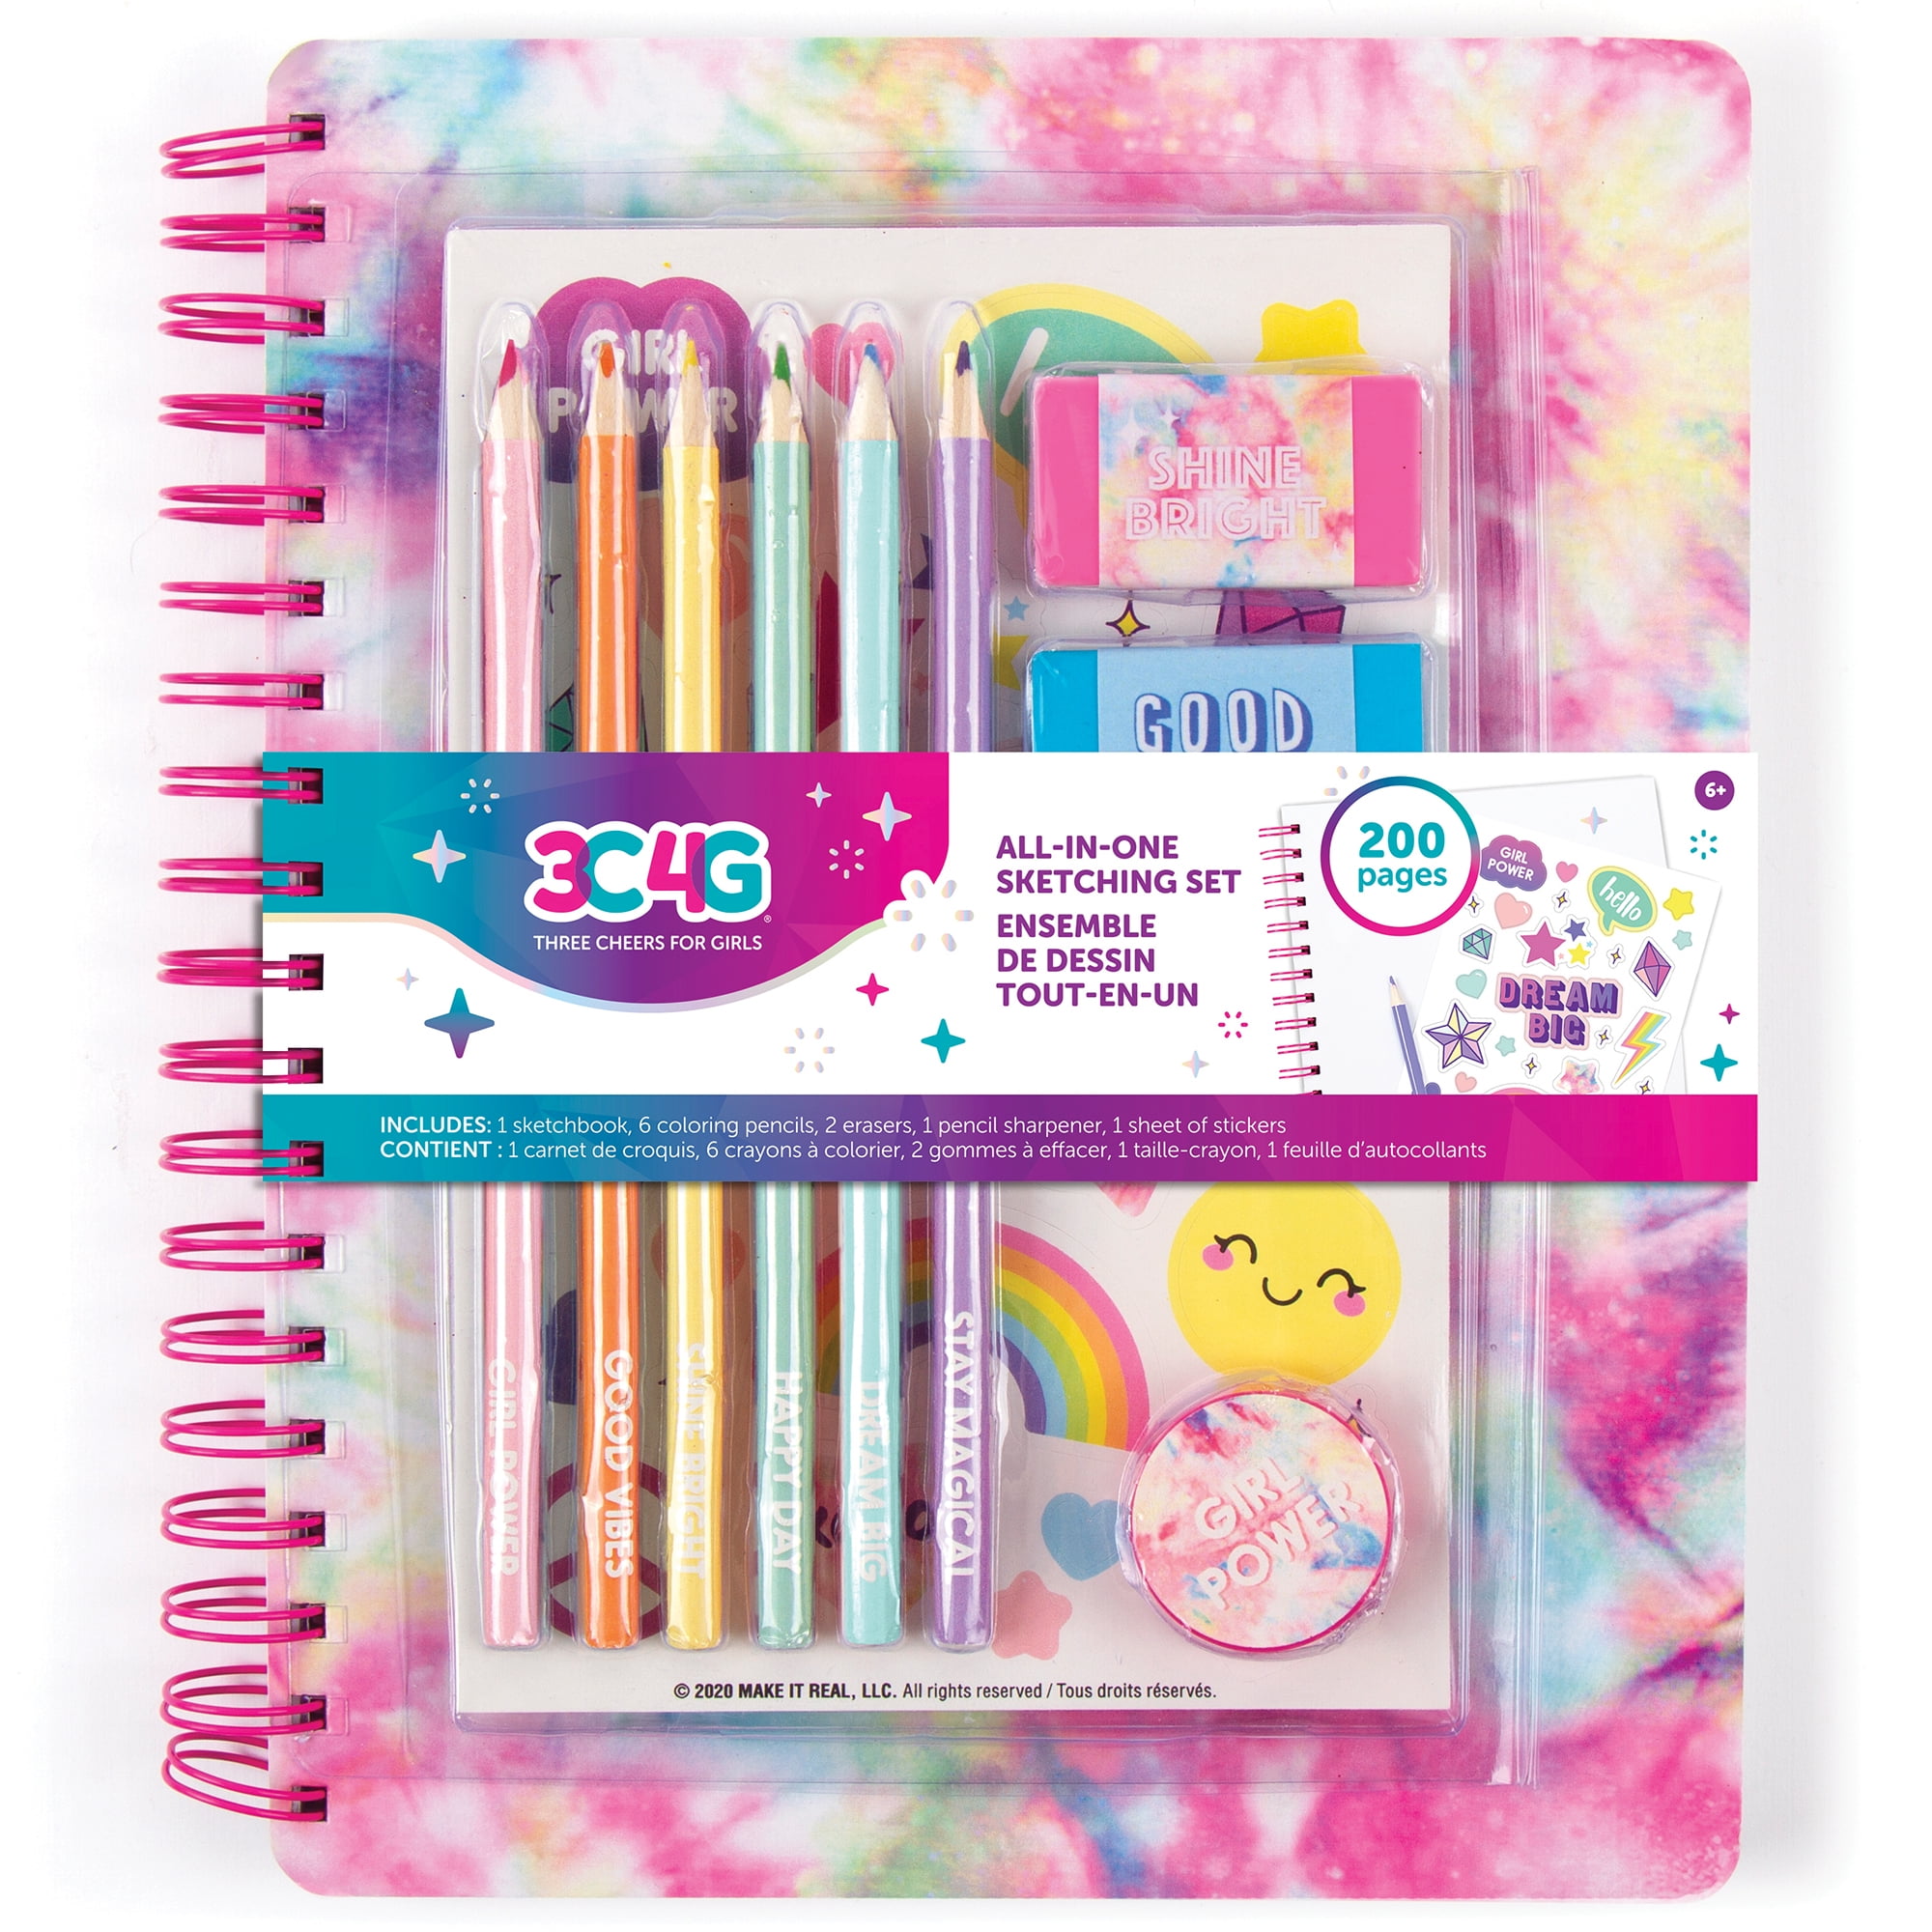 Three Cheers for Girls - Pink & Gold All-in-1 Sketchbook Set - Girls Diary,  Journal, Sketch Book for Kids w/Pencils, Stickers & More - Drawing Kit for